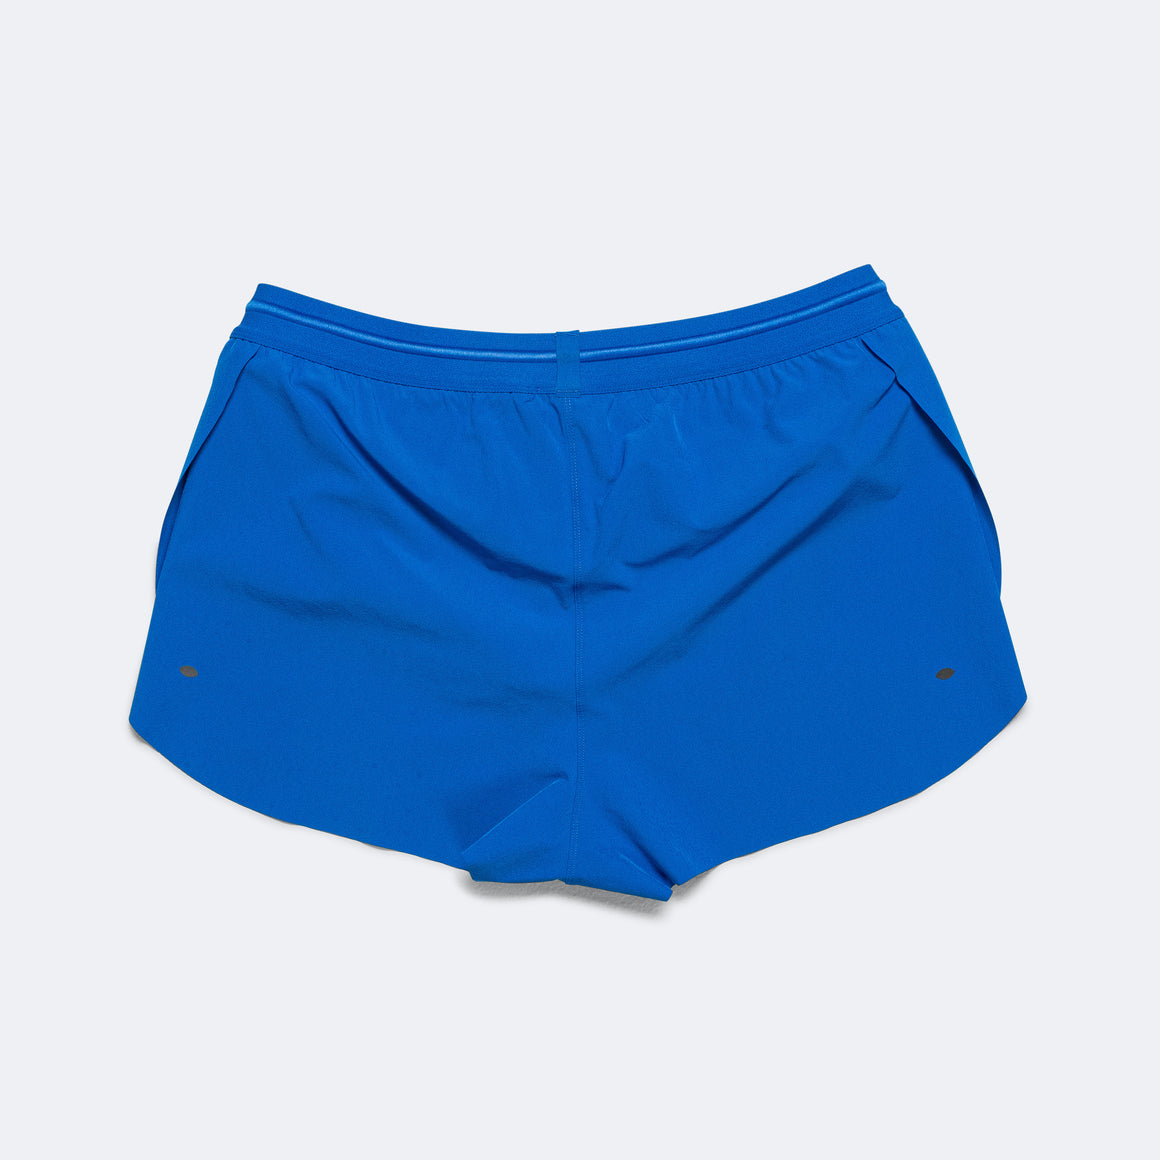 District Vision - Mens 2" Race Shorts - Surf Blue - Up There Athletics